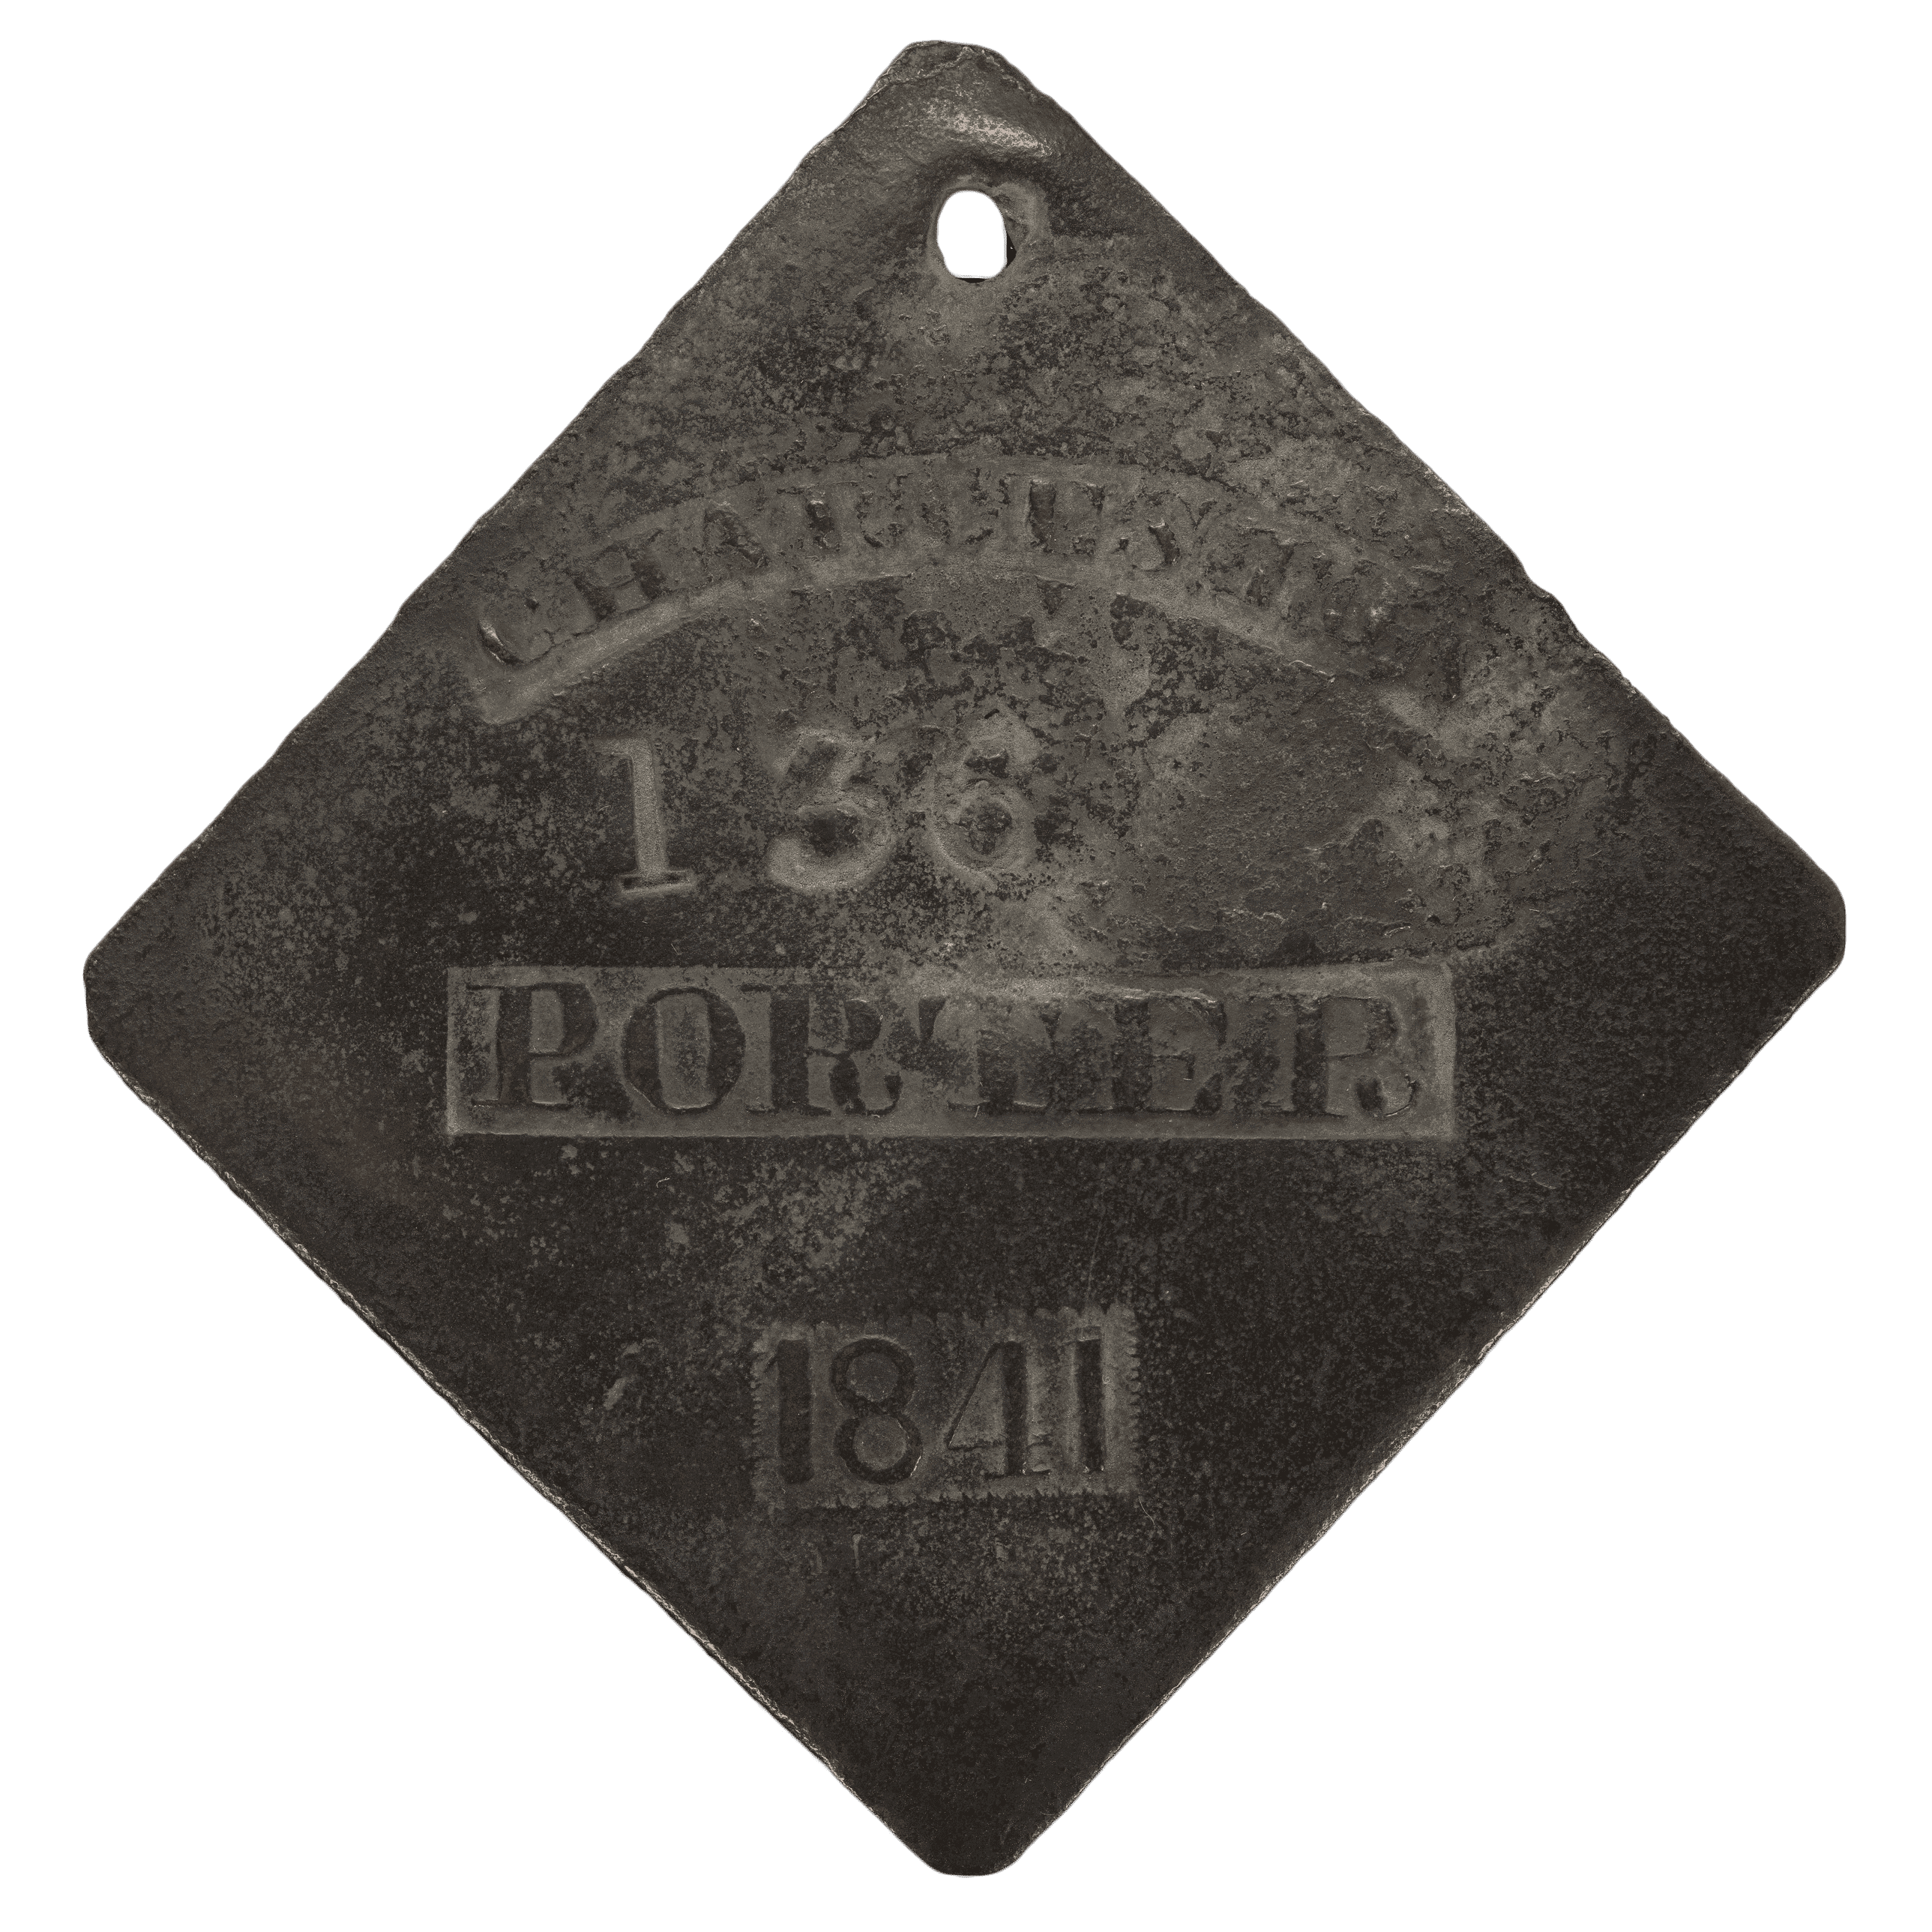 Square metal badge with clipped corners.  It reads "CHARLESTON / 136 / PORTER / 1841"